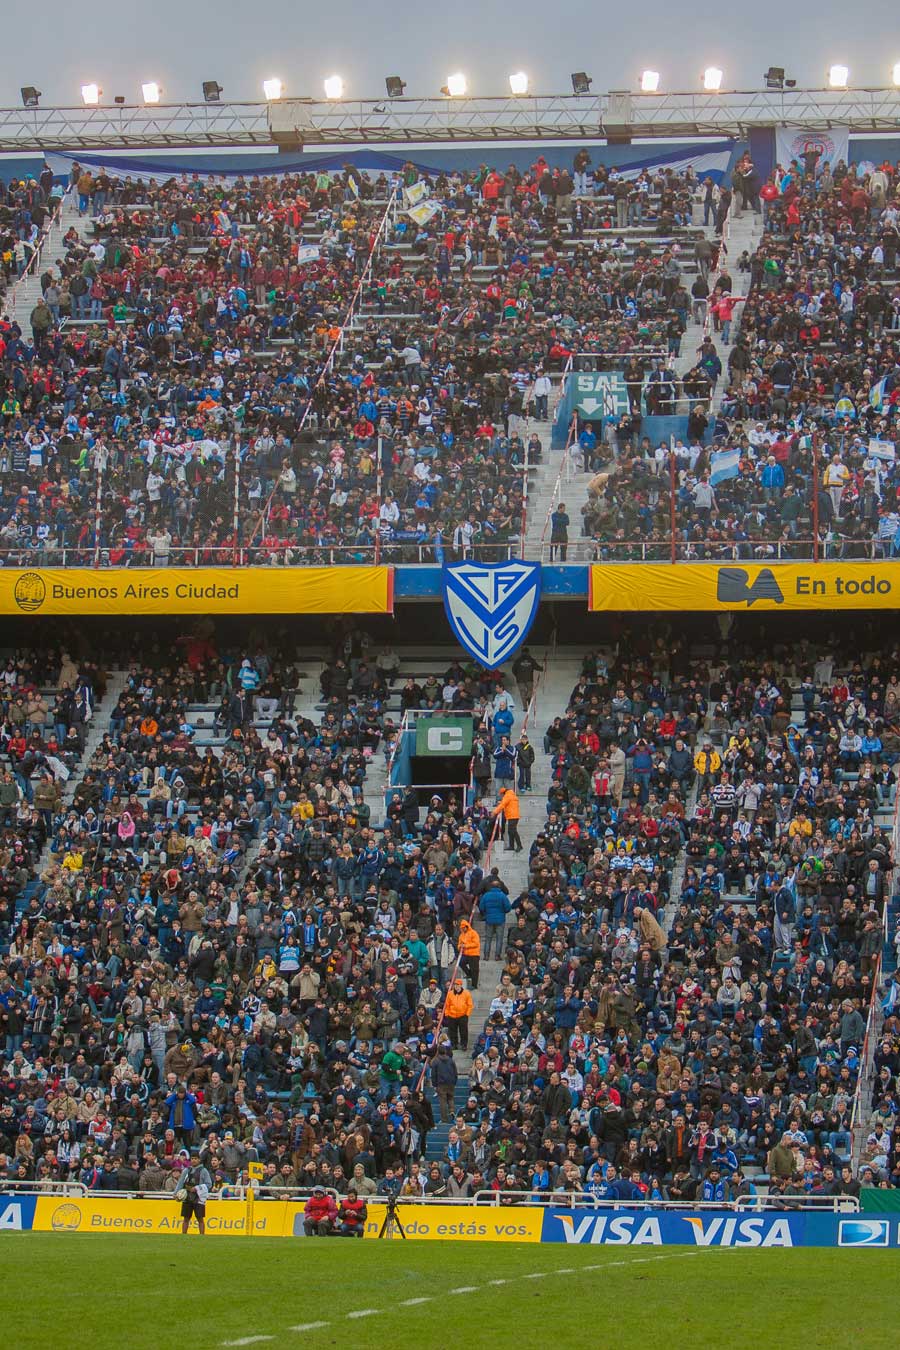 Packed stands greet Argentina and Stade Francais